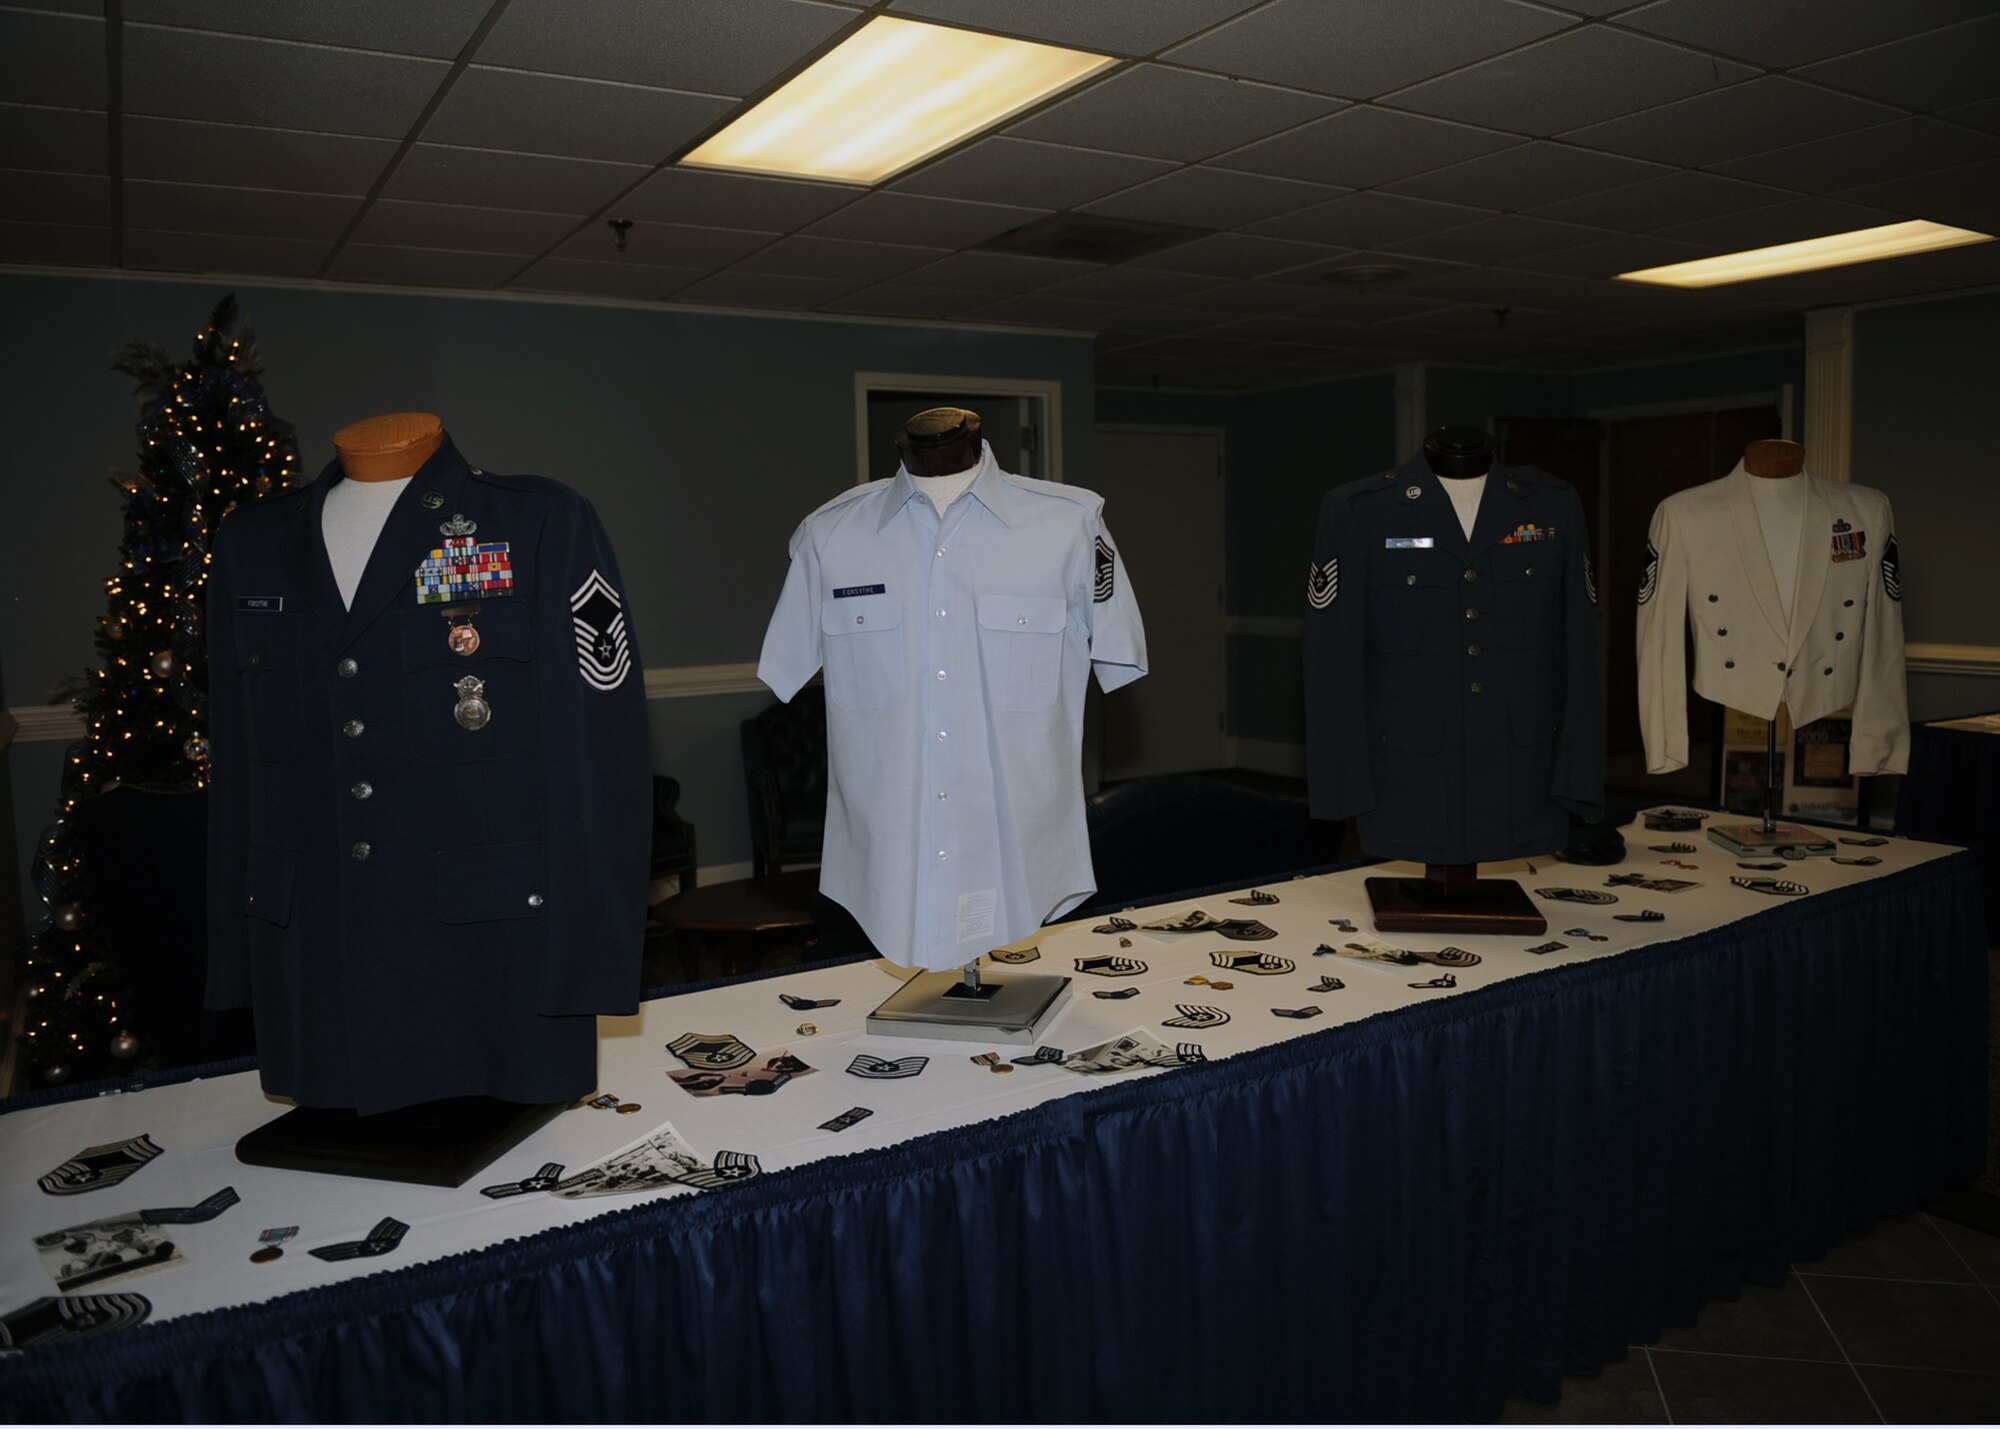 Air Force uniforms provided by retired Chief Master Sgt. Bob Forsythe sit on display during the Enlisted Heritage Banquet on Seymour Johnson Air Force Base, N.C., Dec. 1, 2009. The Enlisted Heritage Banquet celebrated the enlisted corps' history, while honoring the 50th anniversary of the rank of chief master sergeant. (U.S. Air Force photo/Senior Airman Ciara Wymbs)  